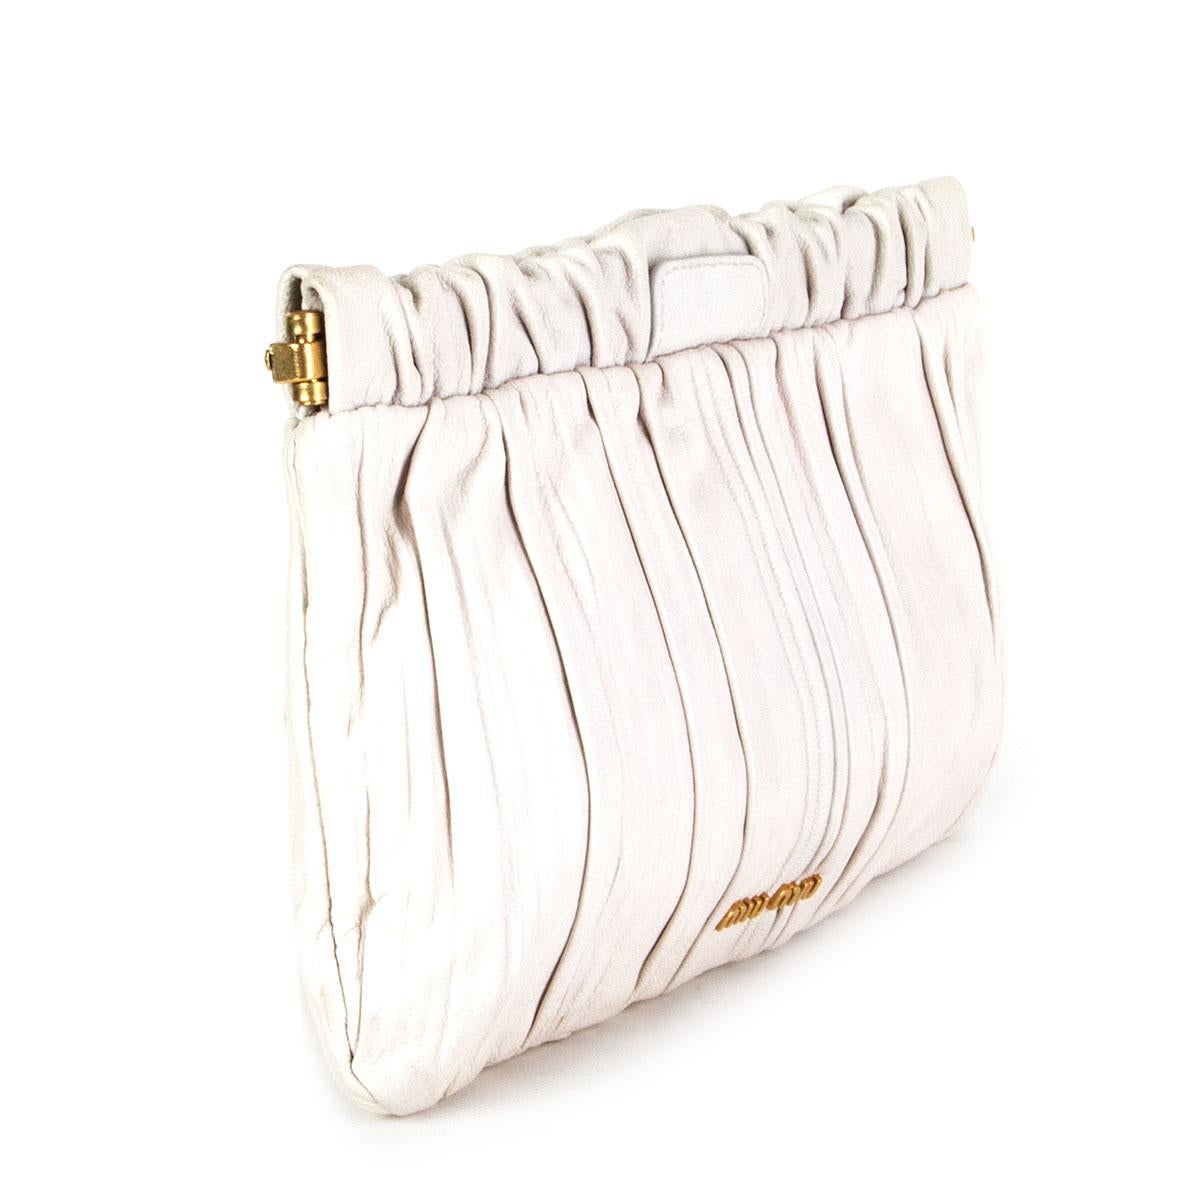 authentic Miu Miu pleated clutch in milk white calfskin featuring gold-tone hardware. Lined in off-white nylon with one open pocket against the front. Has been carried and is in excellent condition. 

Height 16cm (6.2in)
Width 25cm (9.8in)
